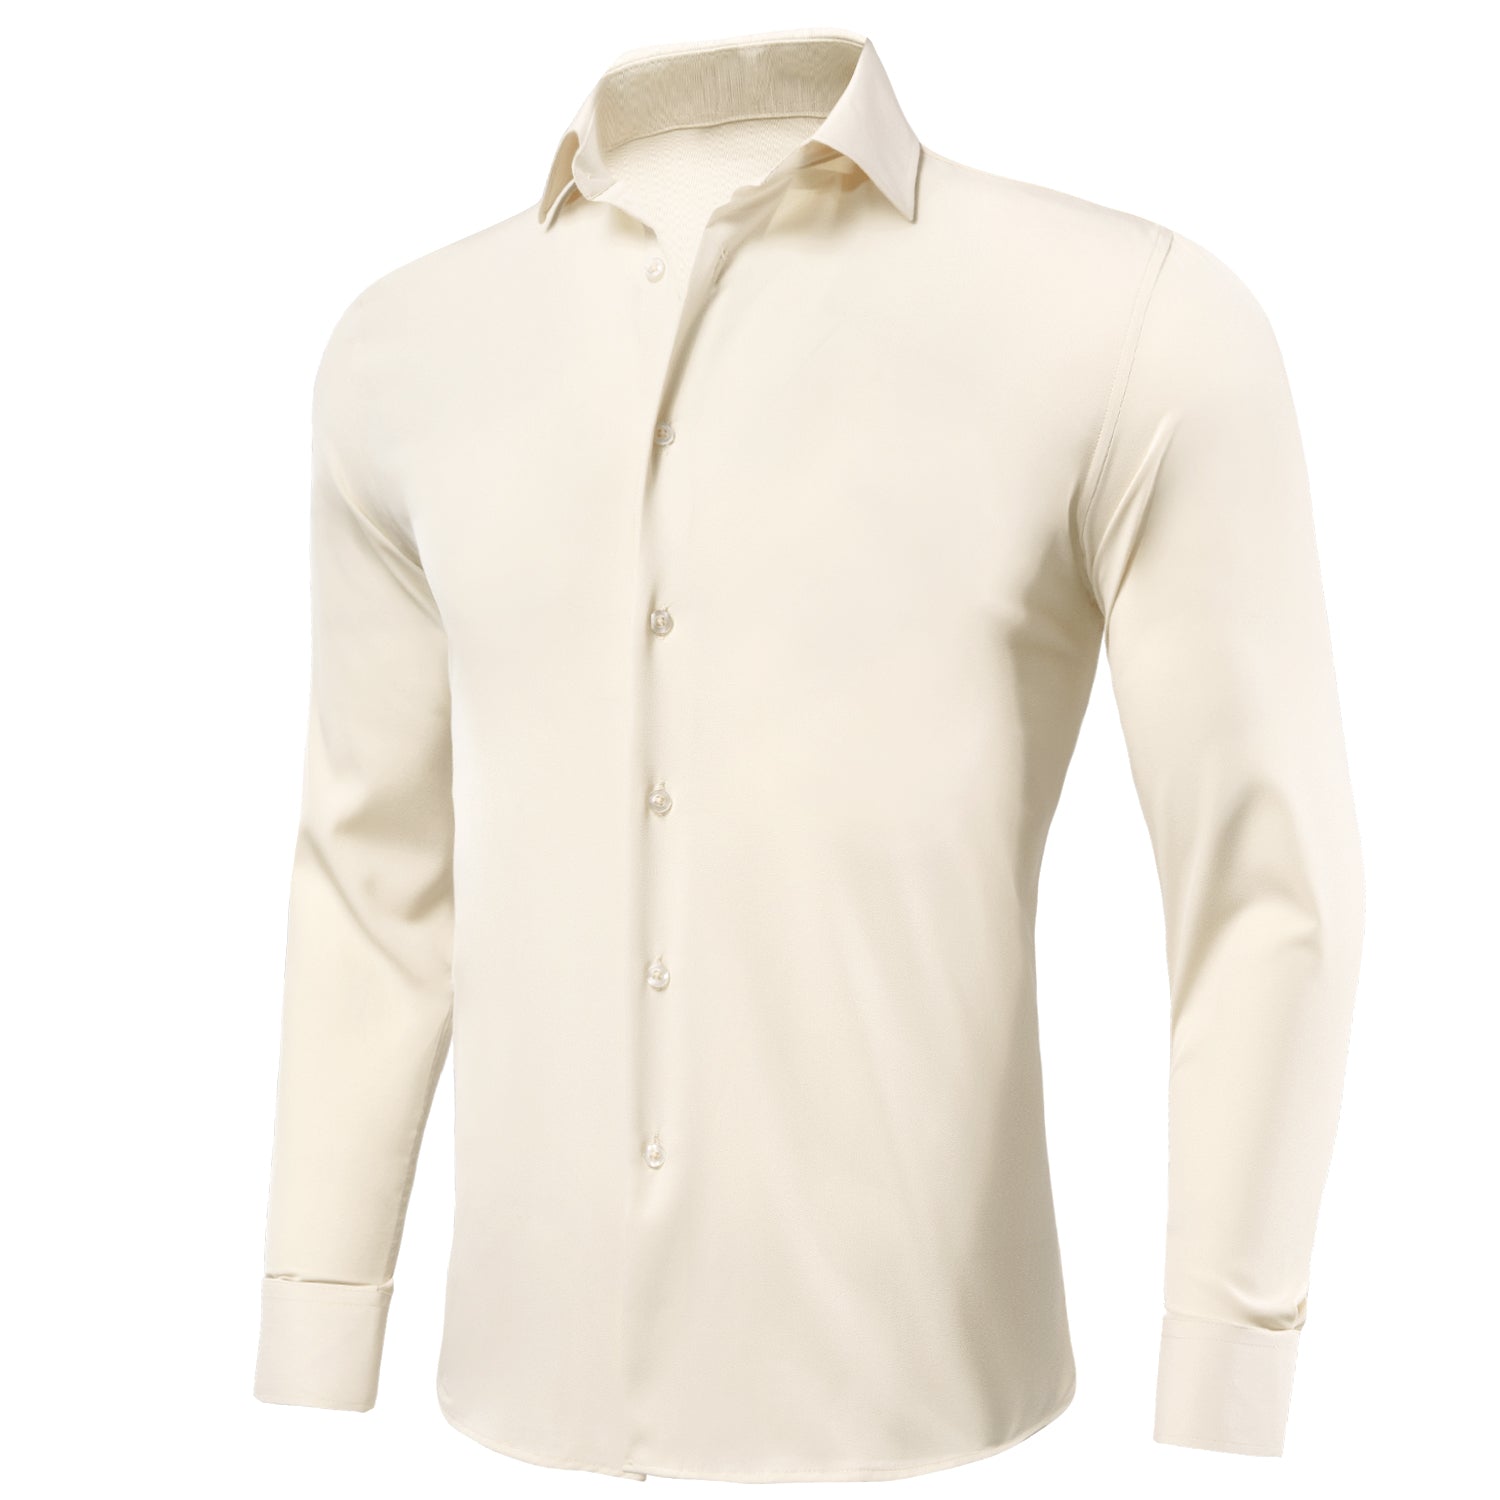 New Milk White Solid Stretch Men's Long Sleeve Shirt